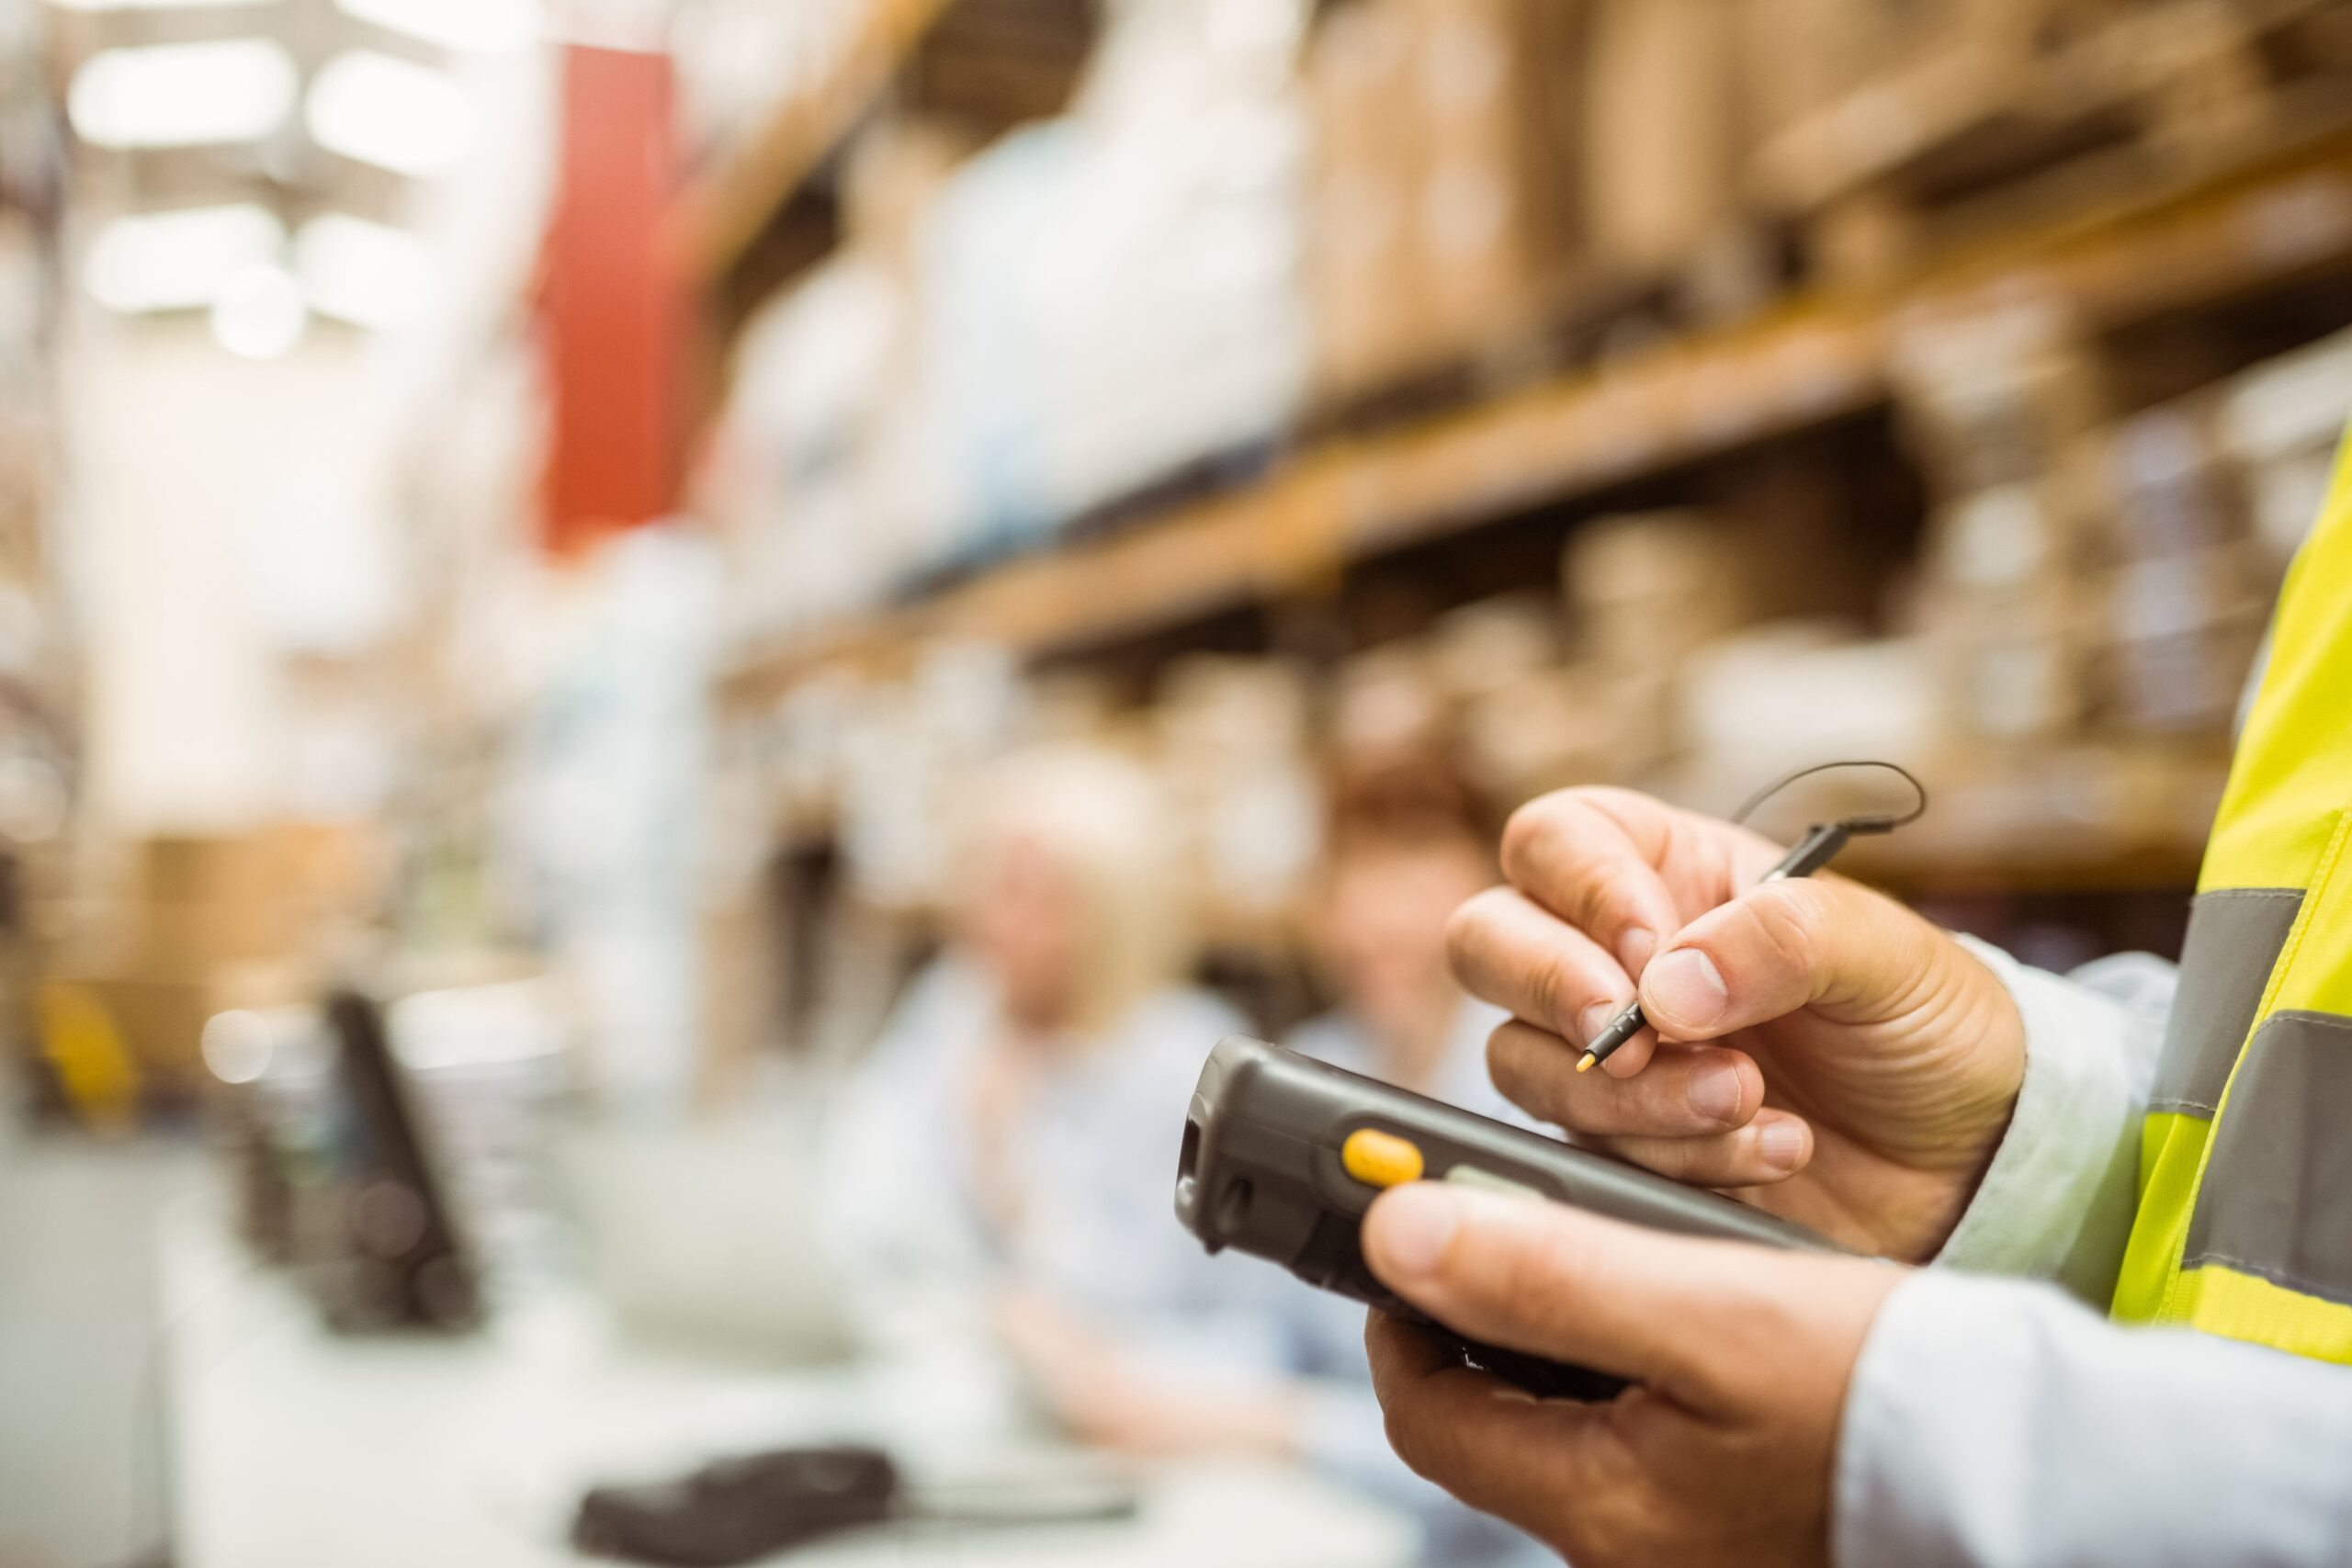 A warehouse employee checks off information in his handheld device.